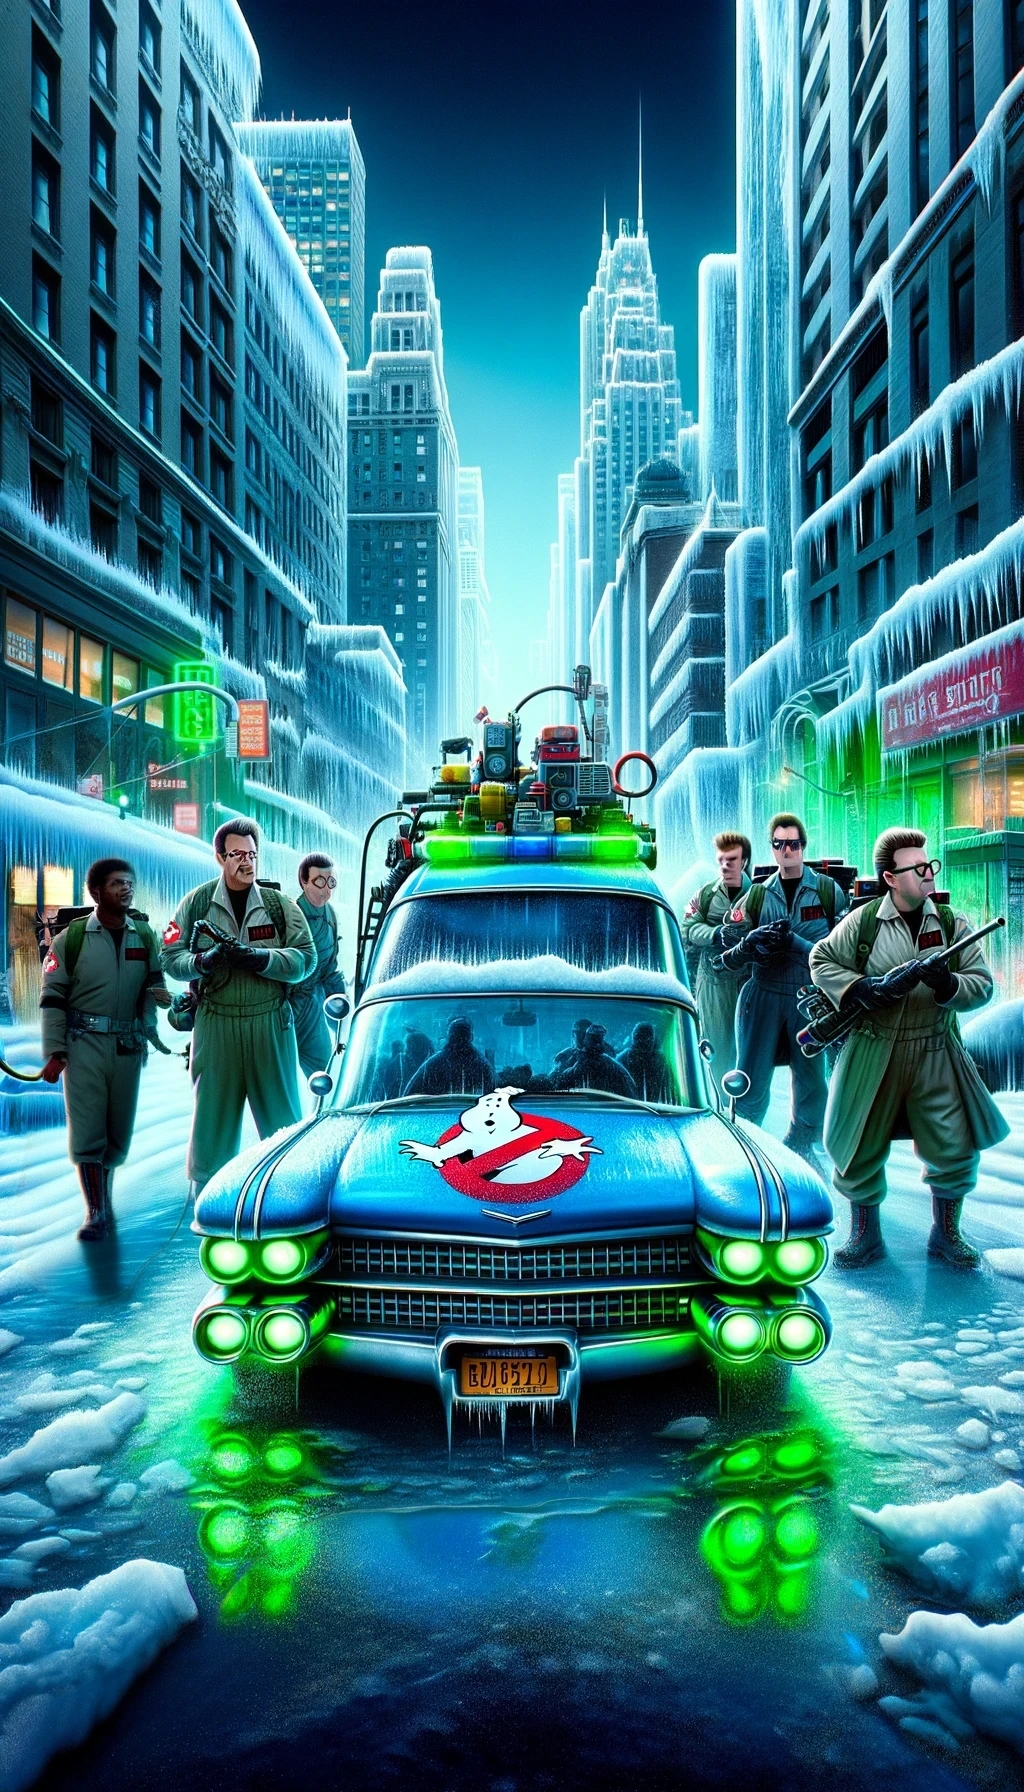 “Ghost Busters Frozen Empire” : A Chilling Tribute with a Dash of Ectoplasmic Excitement